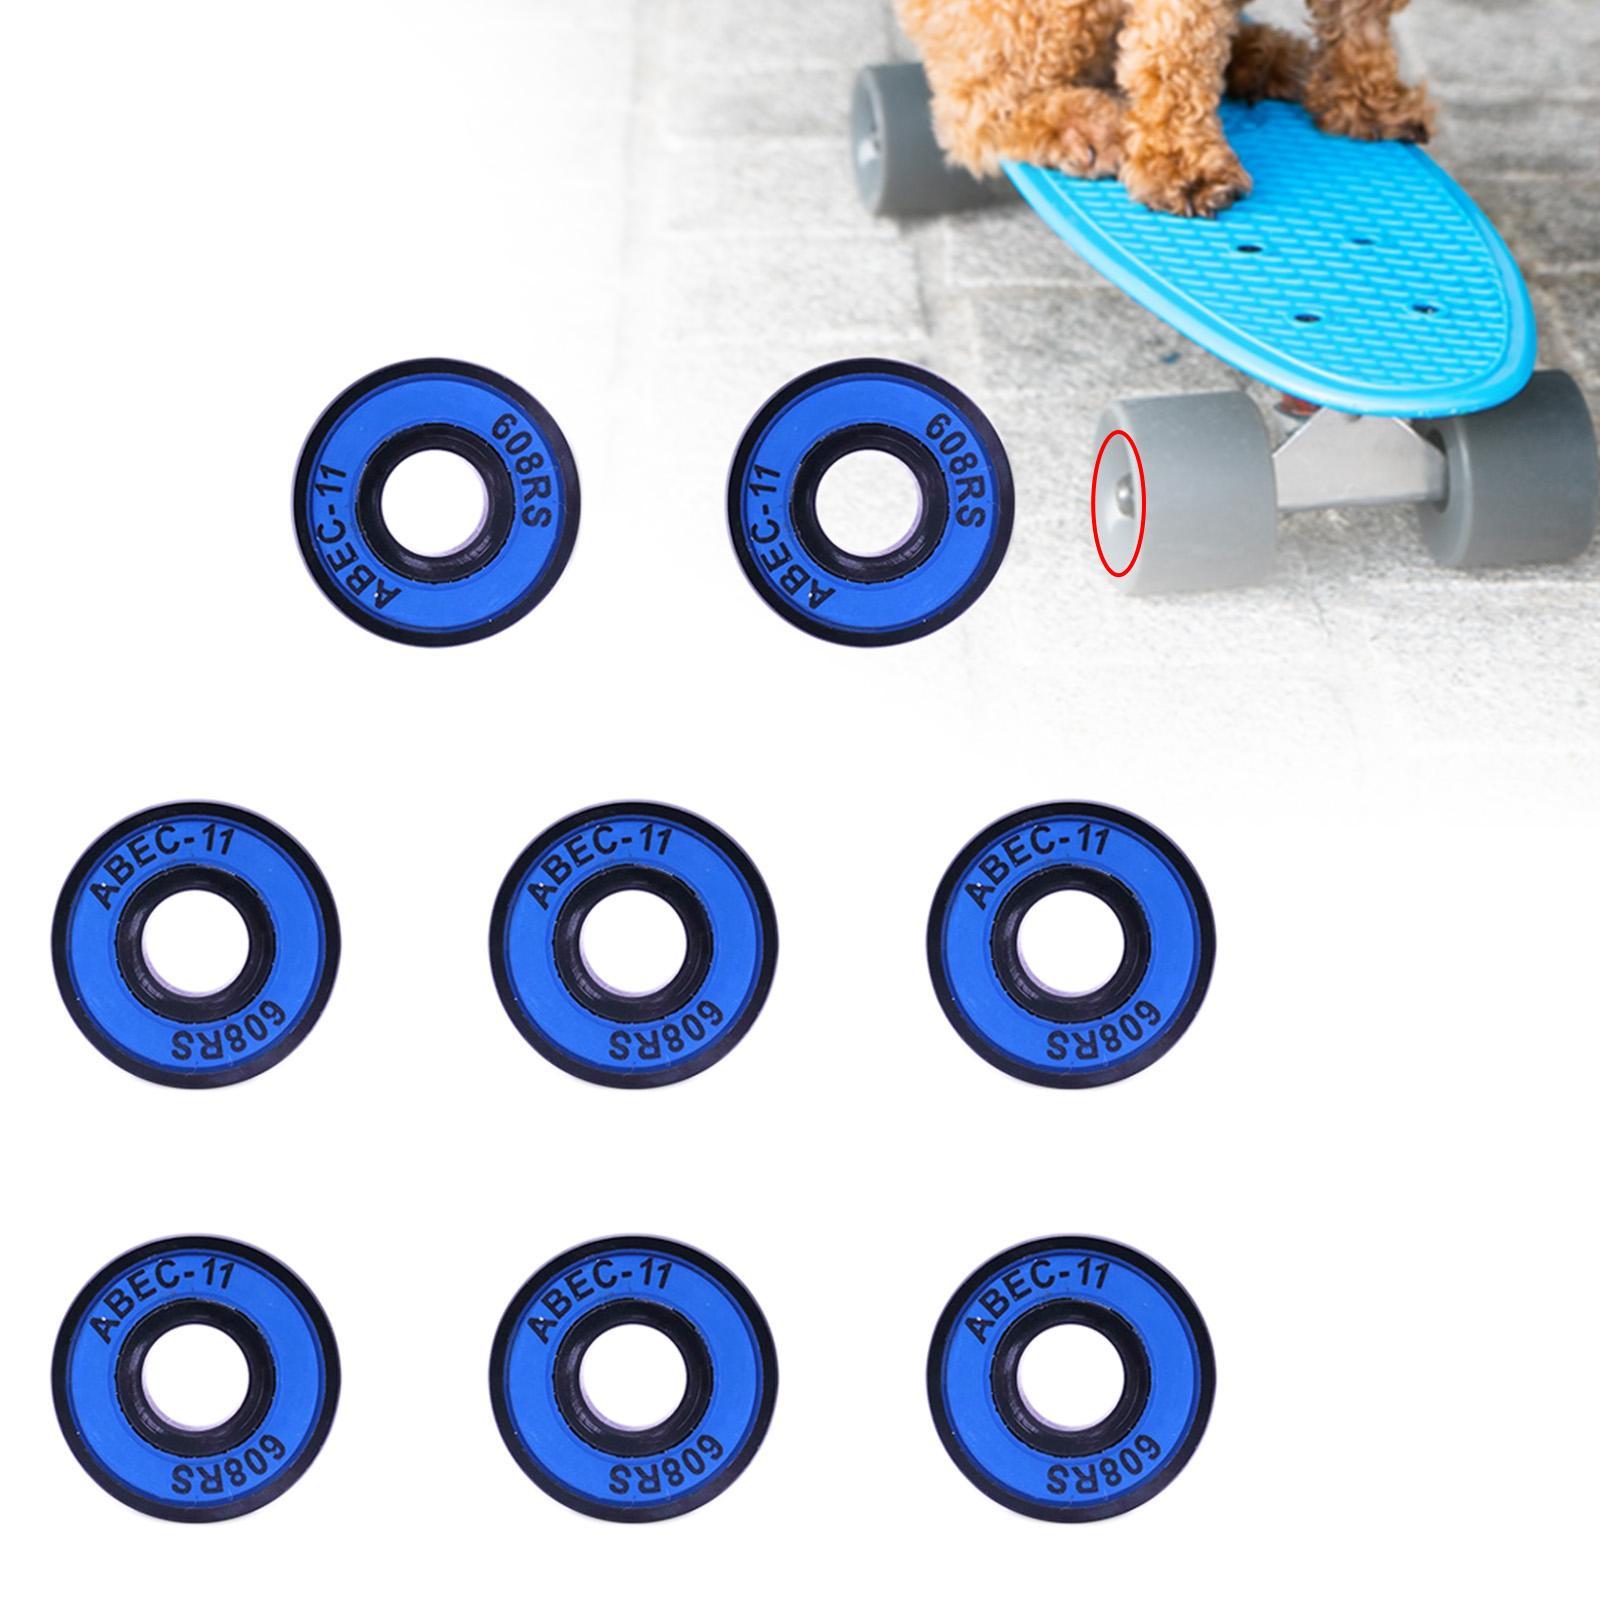 8x Bearings Scooter Wheel Abec 11 608RS Quad Inline Roller Skate - blue